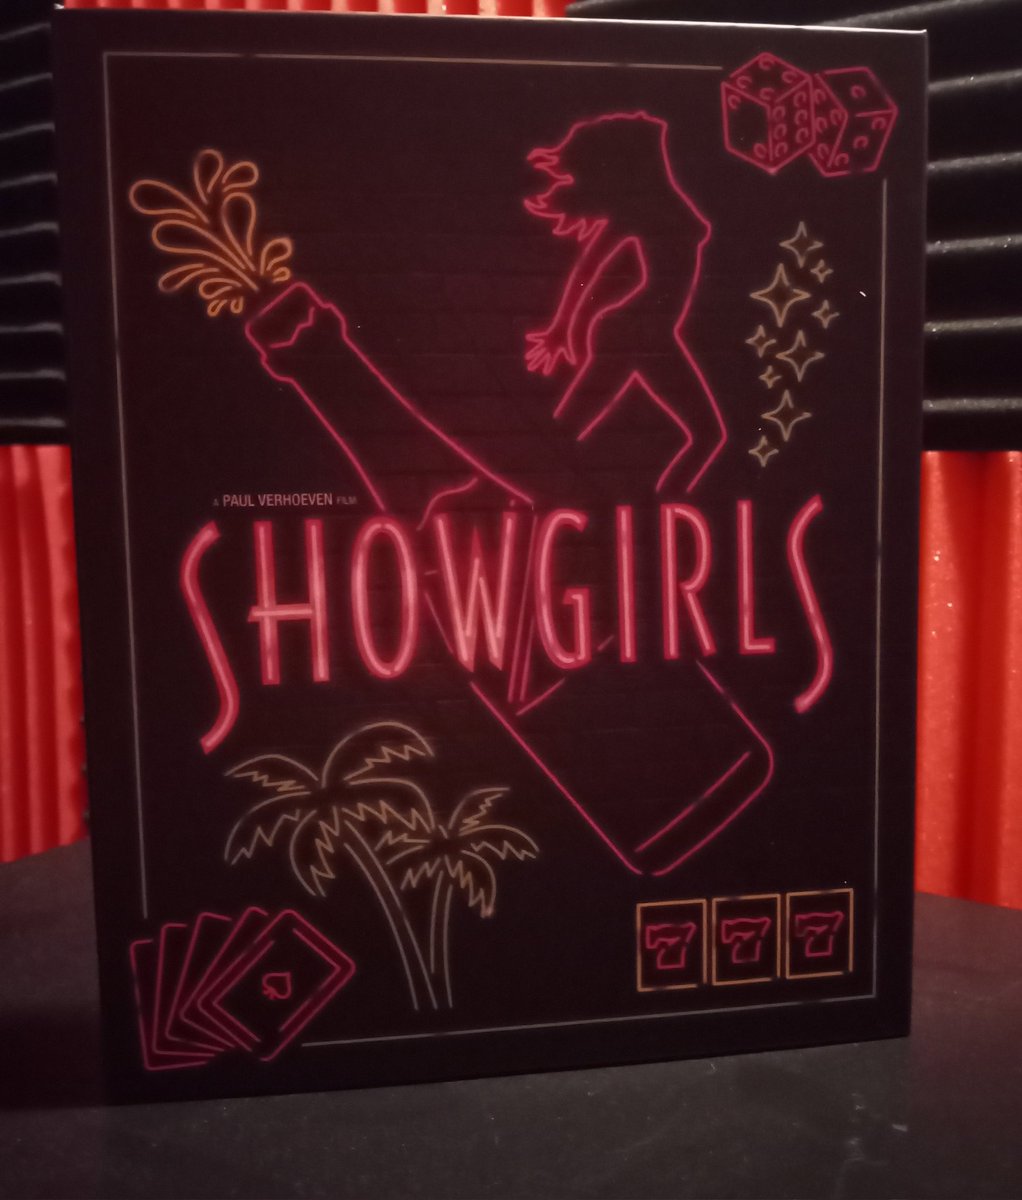 Look what just arrived from @VinegarSyndrome, my 7th copy of Showgirls.